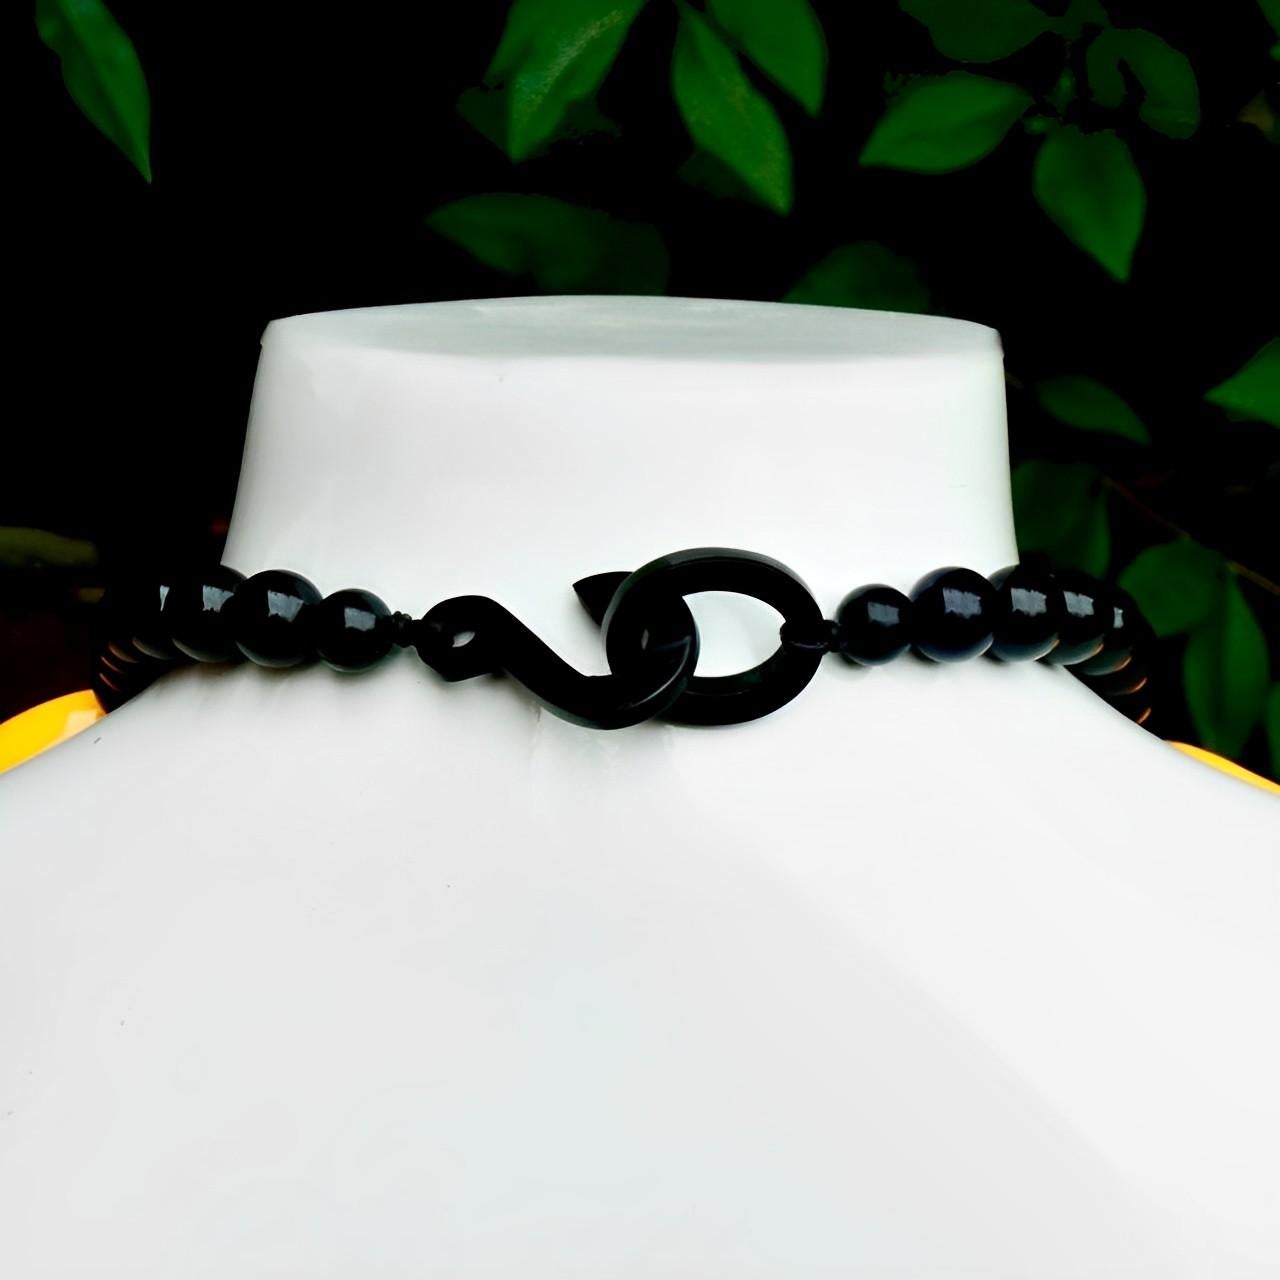 Women's or Men's Marion Godart Yellow and Black Shiny Plastic Bananas and Black Bead Necklace For Sale